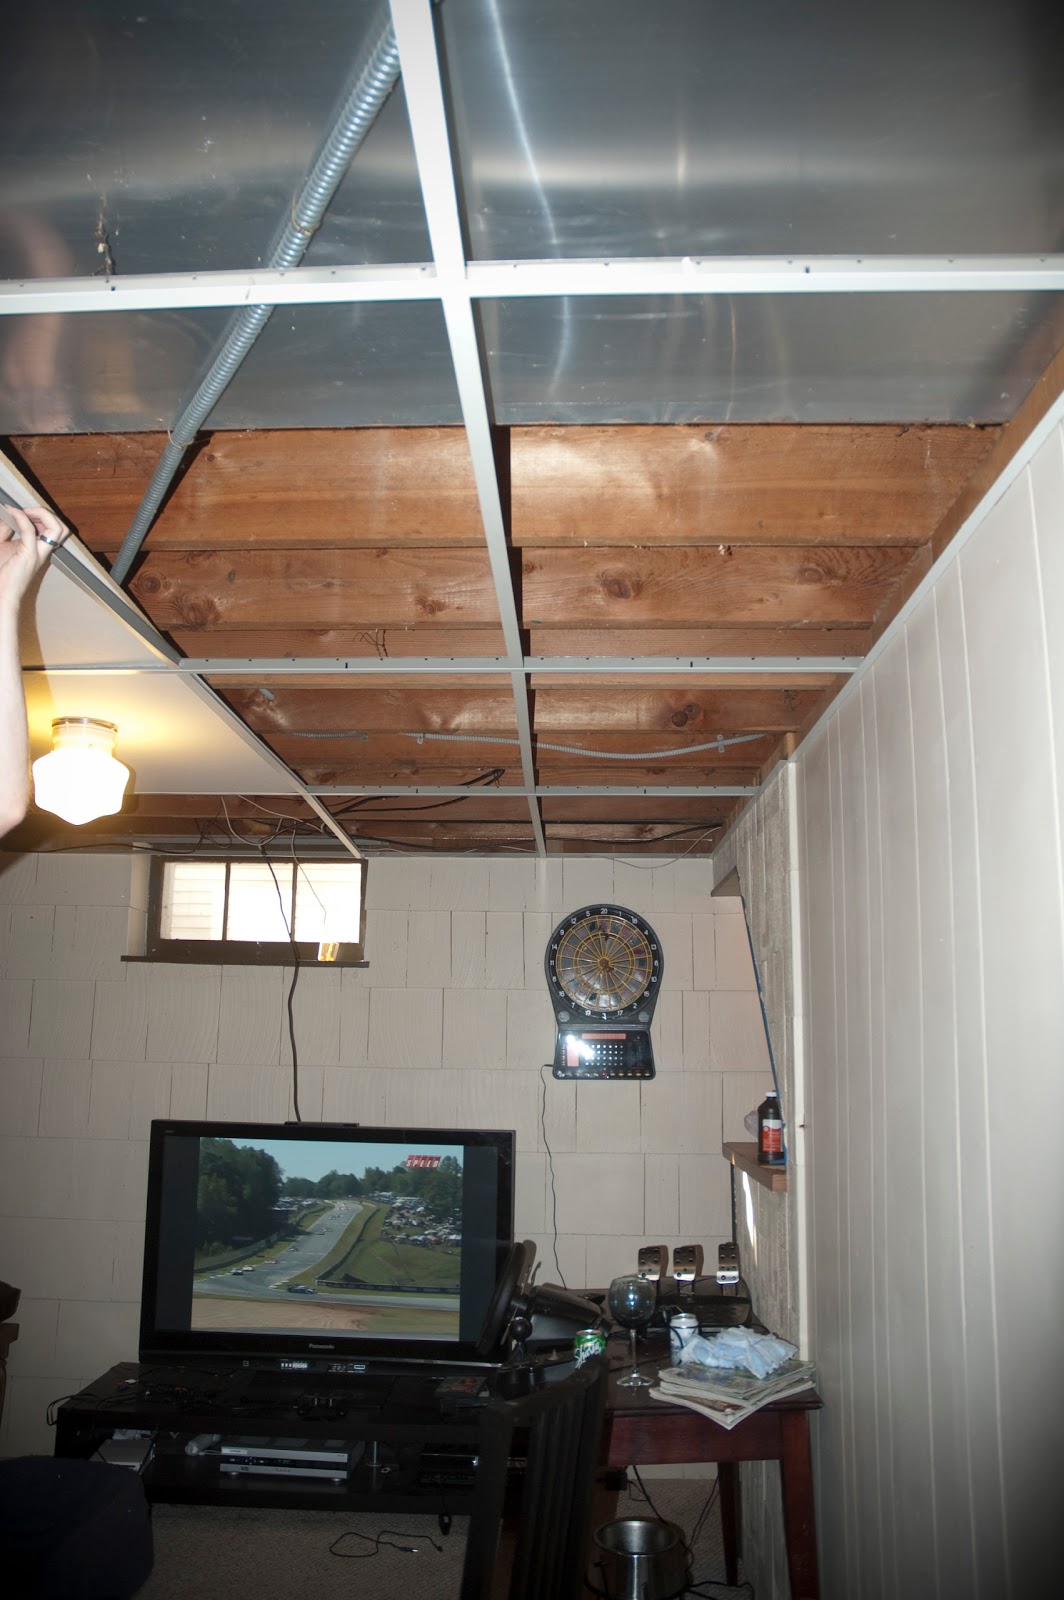 The Organized McTatty Basement Drop  Ceiling  is Down 